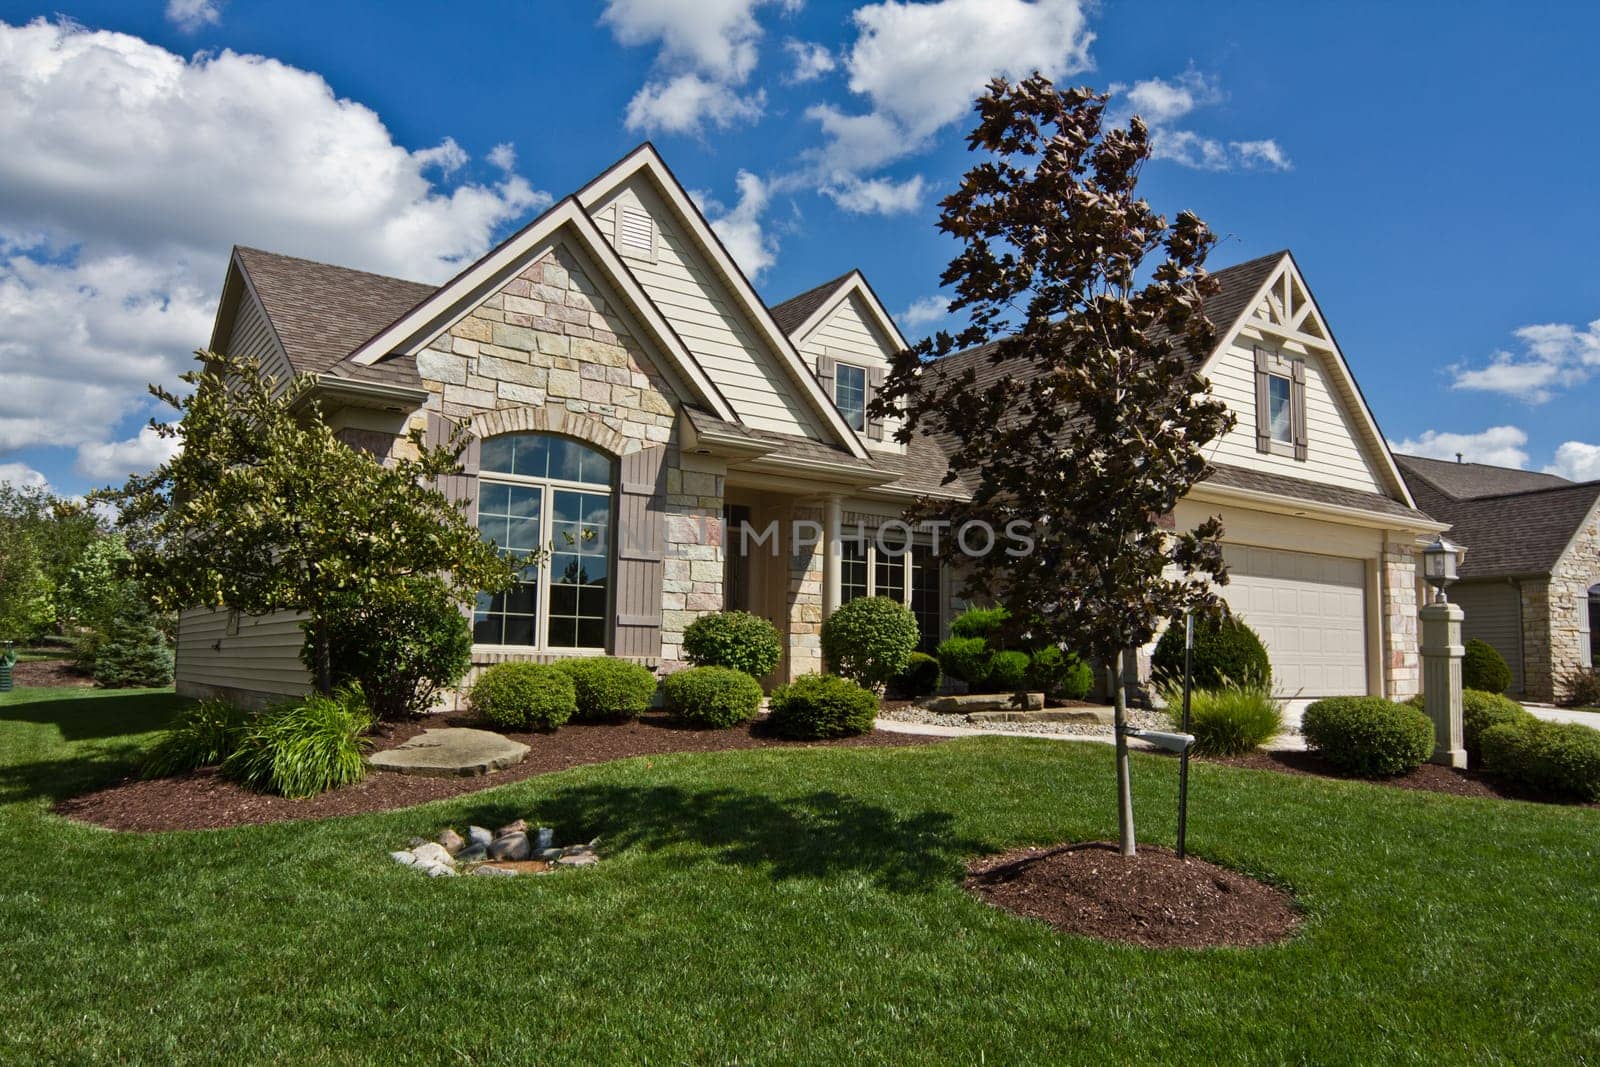 Sunny Suburban Home with Beautiful Landscaping in Fort Wayne, Indiana by njproductions